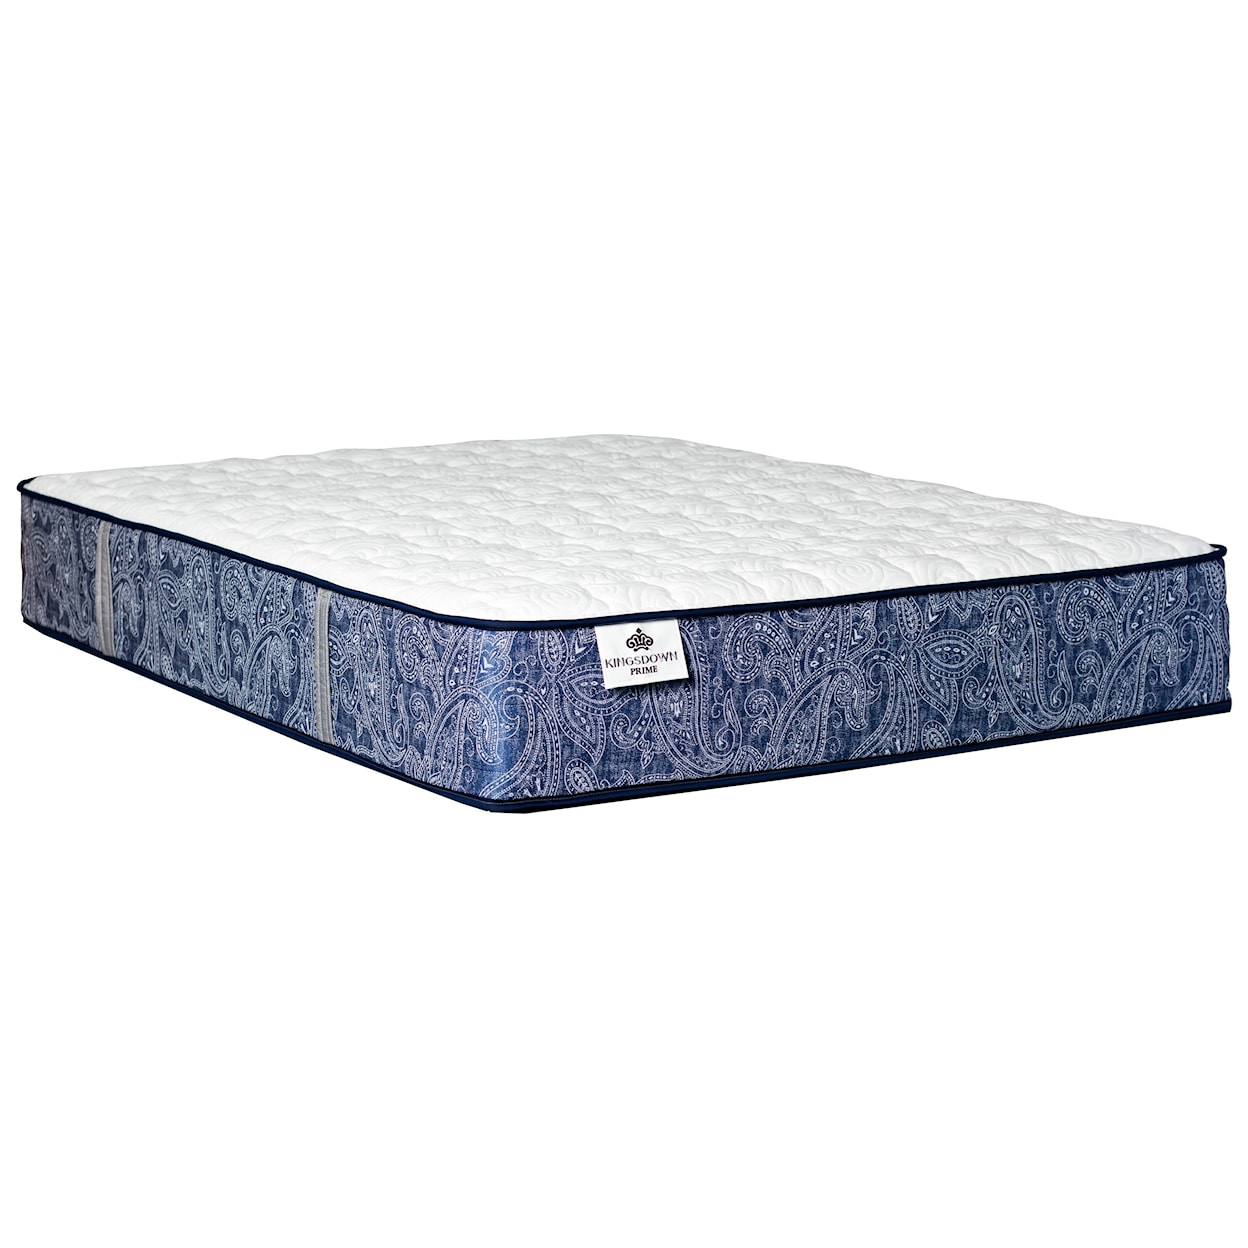 Kingsdown Merrivale Firm Twin 13" Firm Coil on Coil Mattress